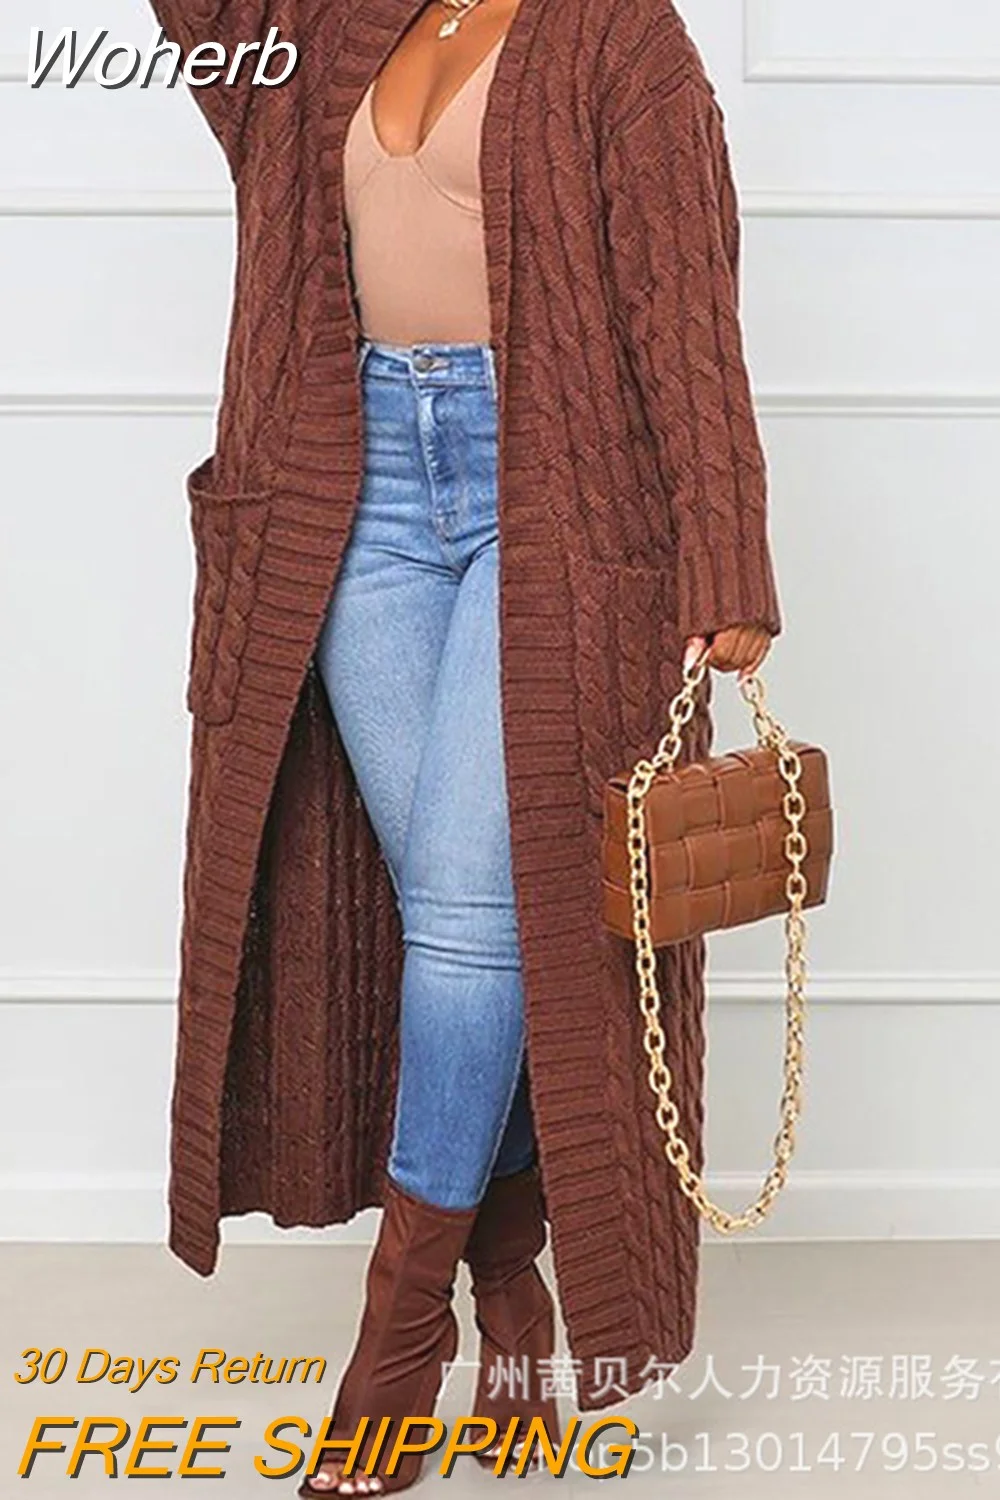 Woherb Front Cable Knit Longline Cardigan Women Long Sleeve Loose Fashion Casual Open Cardigan Knitwear Solid Color